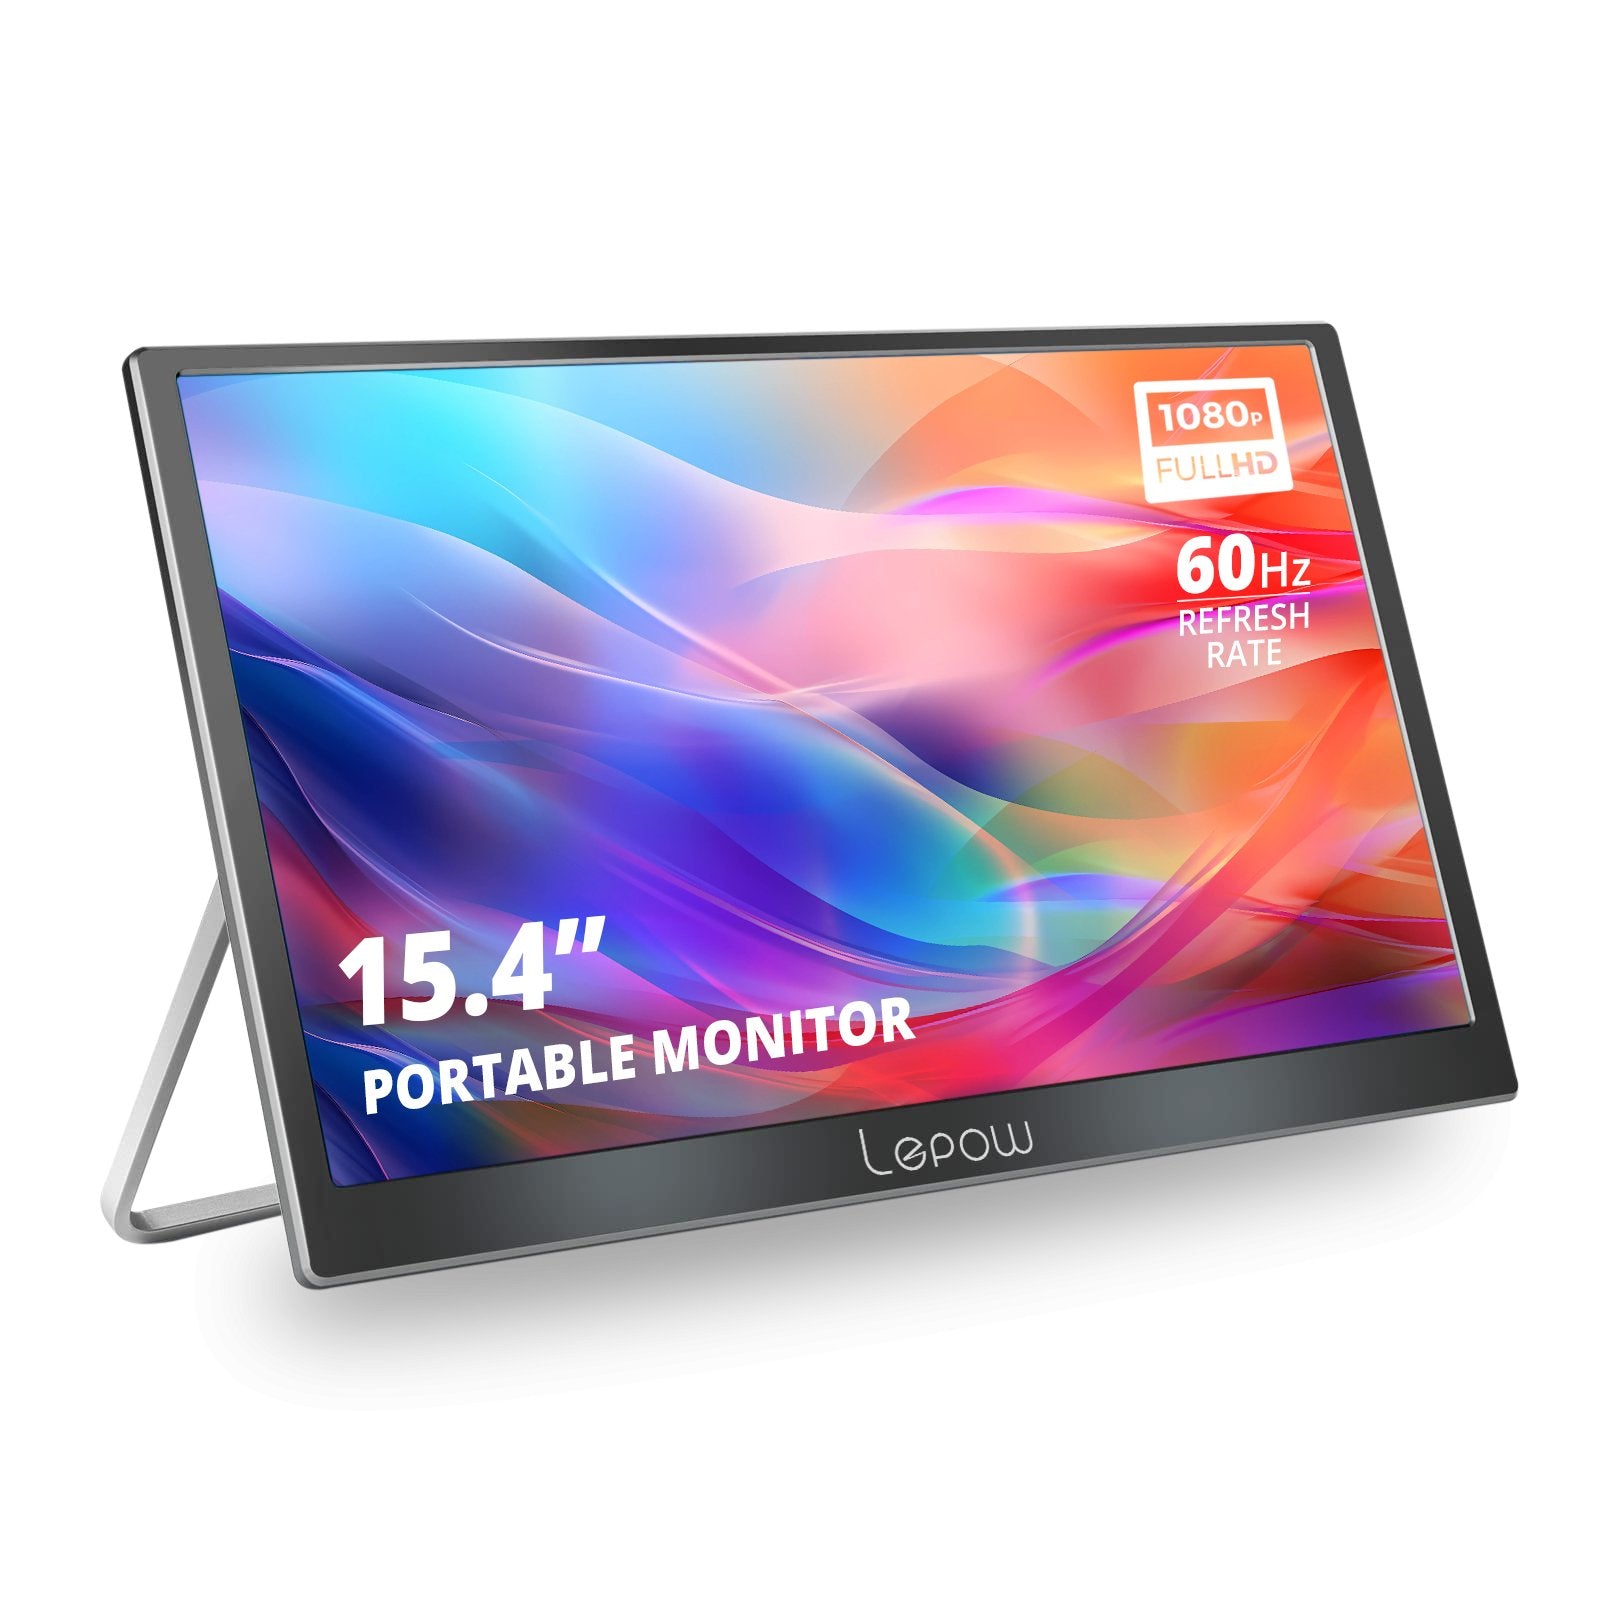 The Best Portable Monitors 2022: Lenovo, Lepow, and more